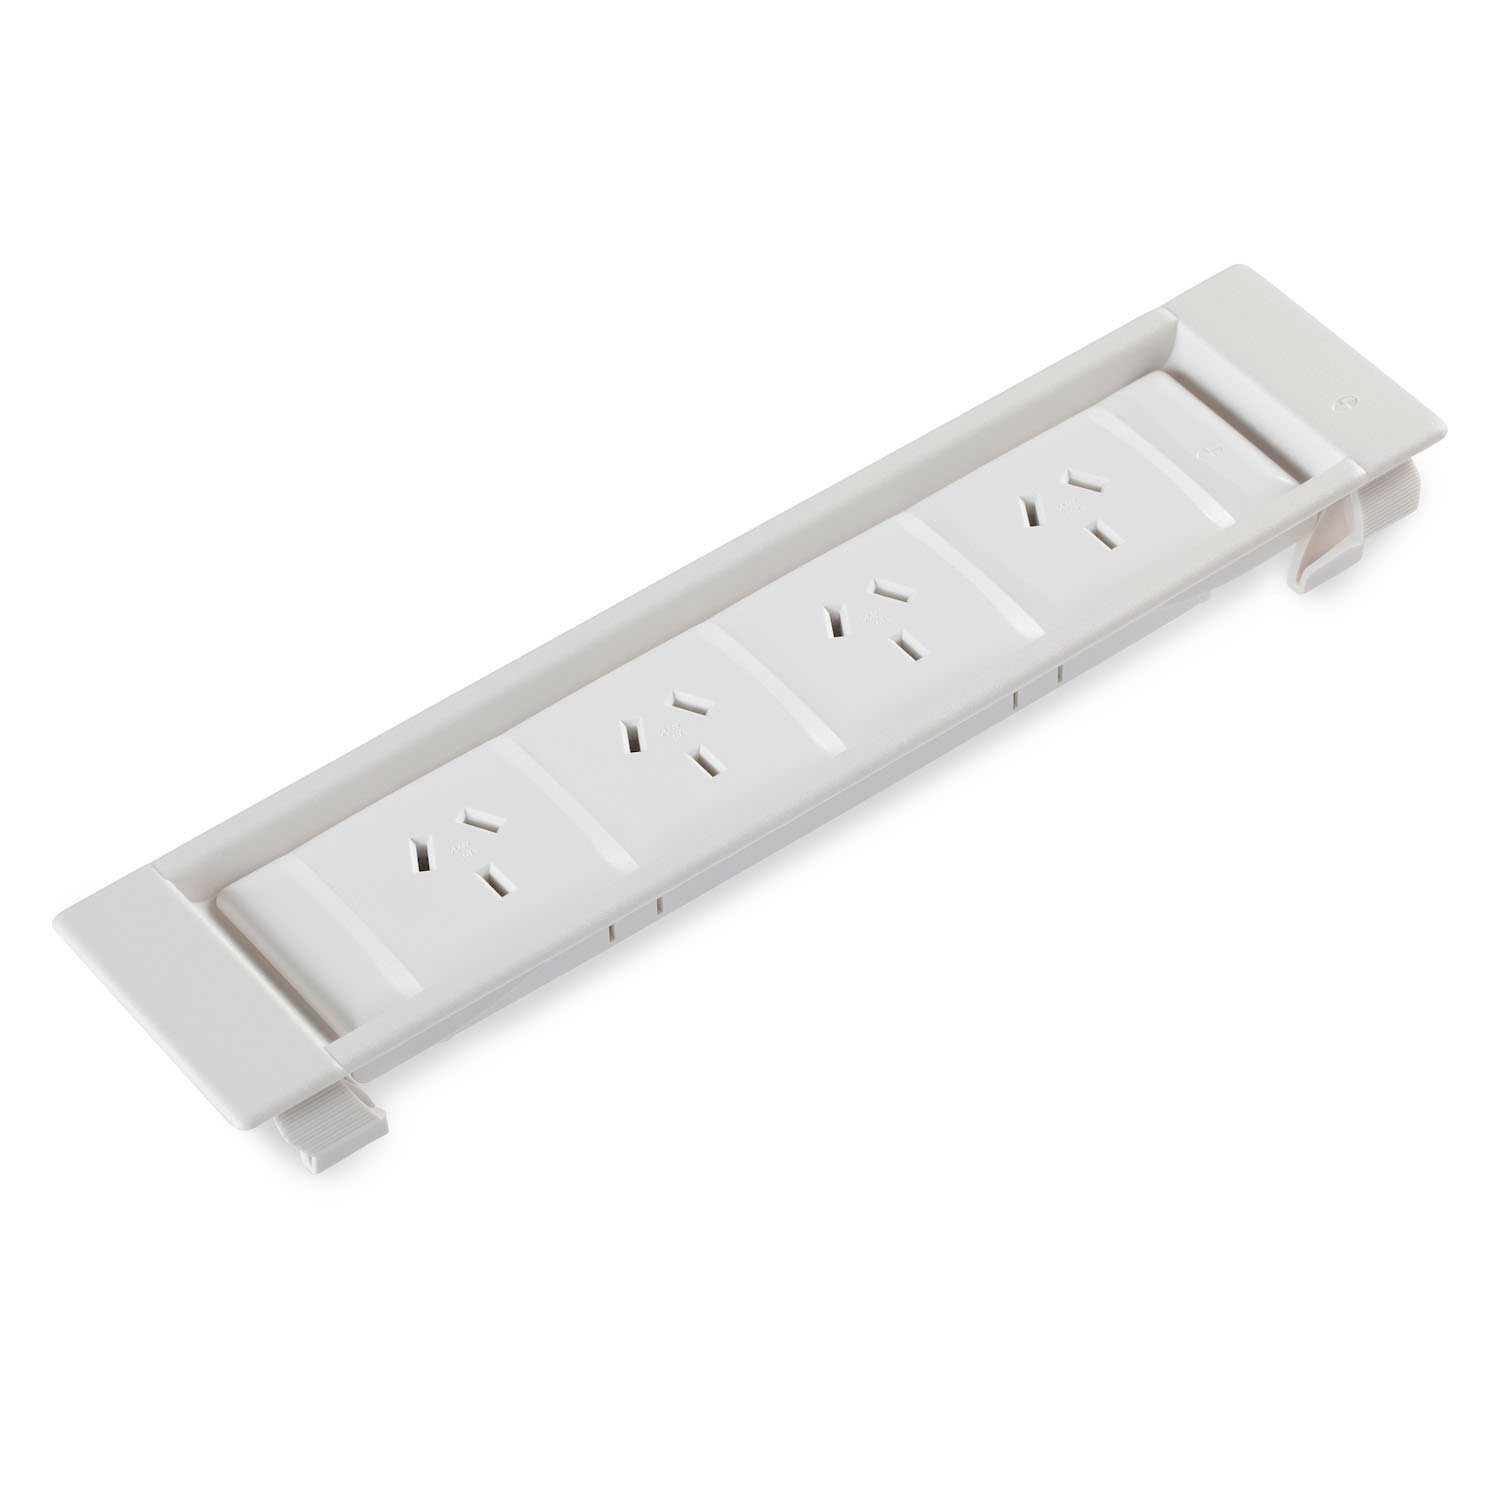 SW1814 – Quad GPO Mounted In Thick Panel Bracket